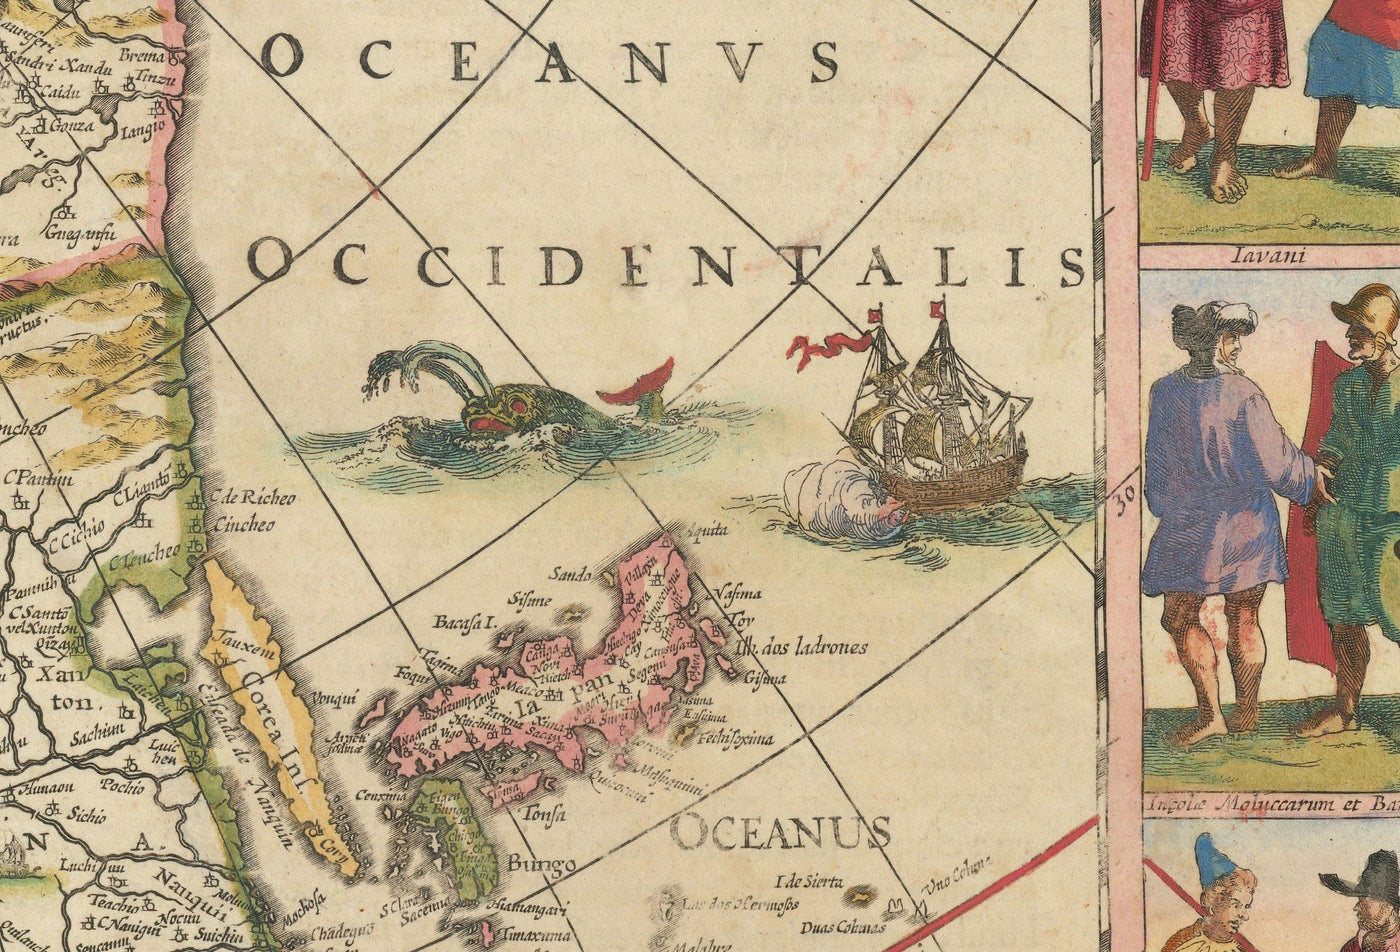 Old Map of Asia, 1640 by Willem Blaeu - Colonial East Indies - China, India, Malaysia, Singapore, Thailand, Philippines